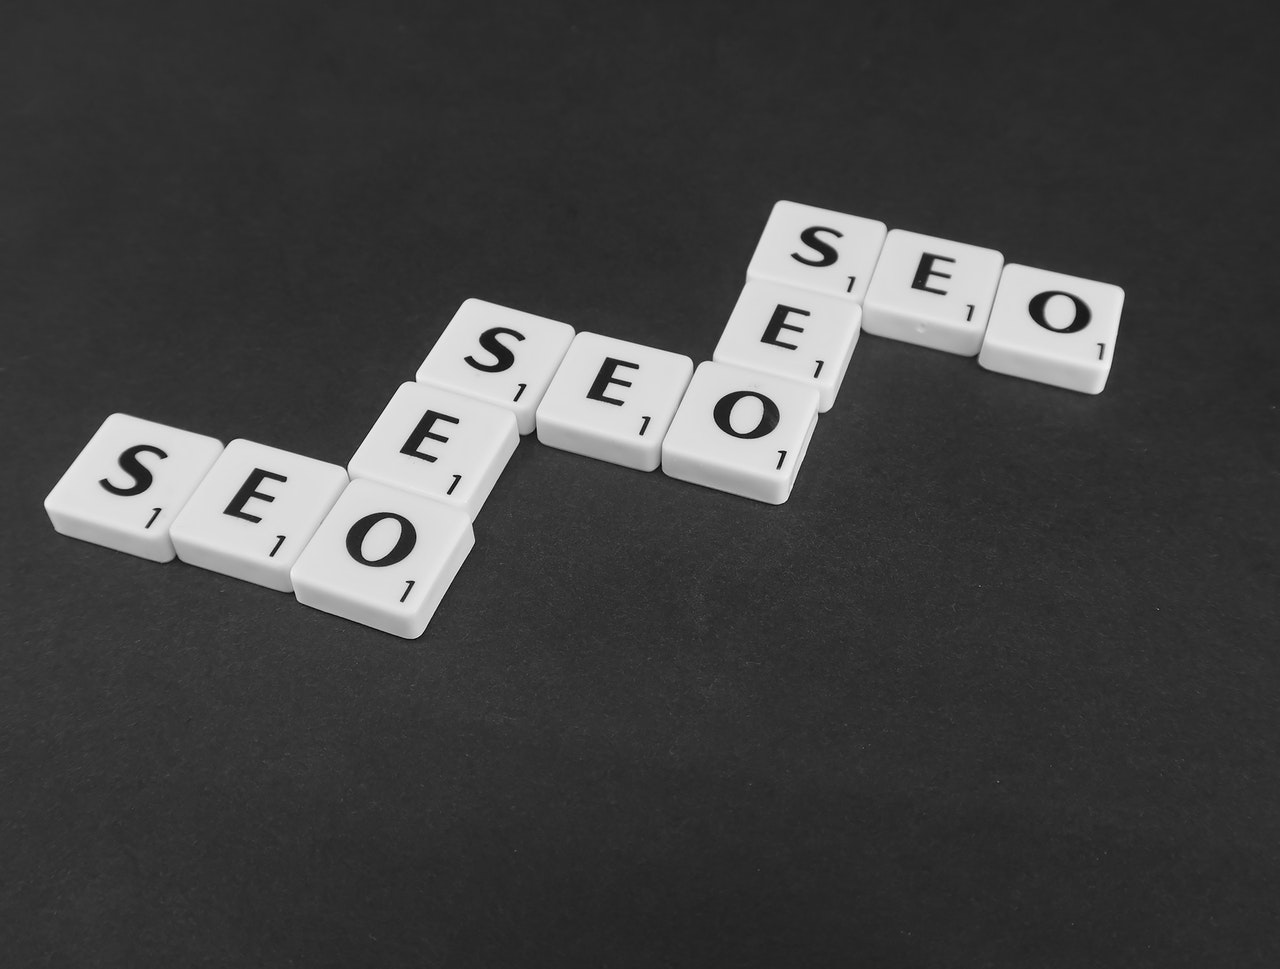 How To Use Search Engine Optimization To Grow Your Business